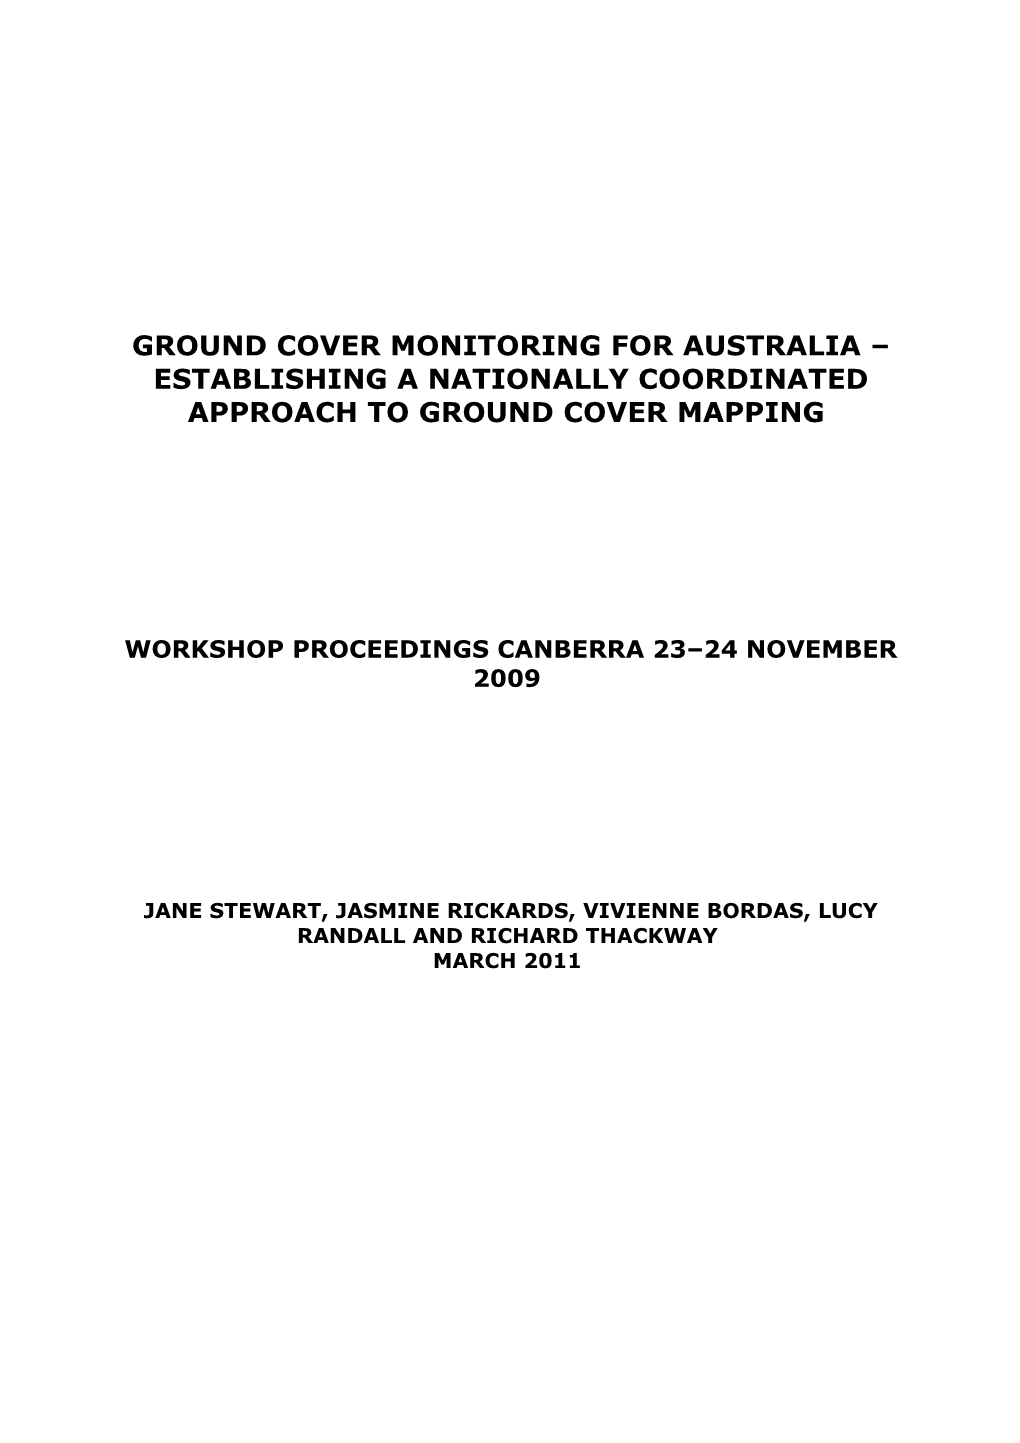 Ground Cover Monitoring for Australia Establishing a Nationally Coordinated Approach To